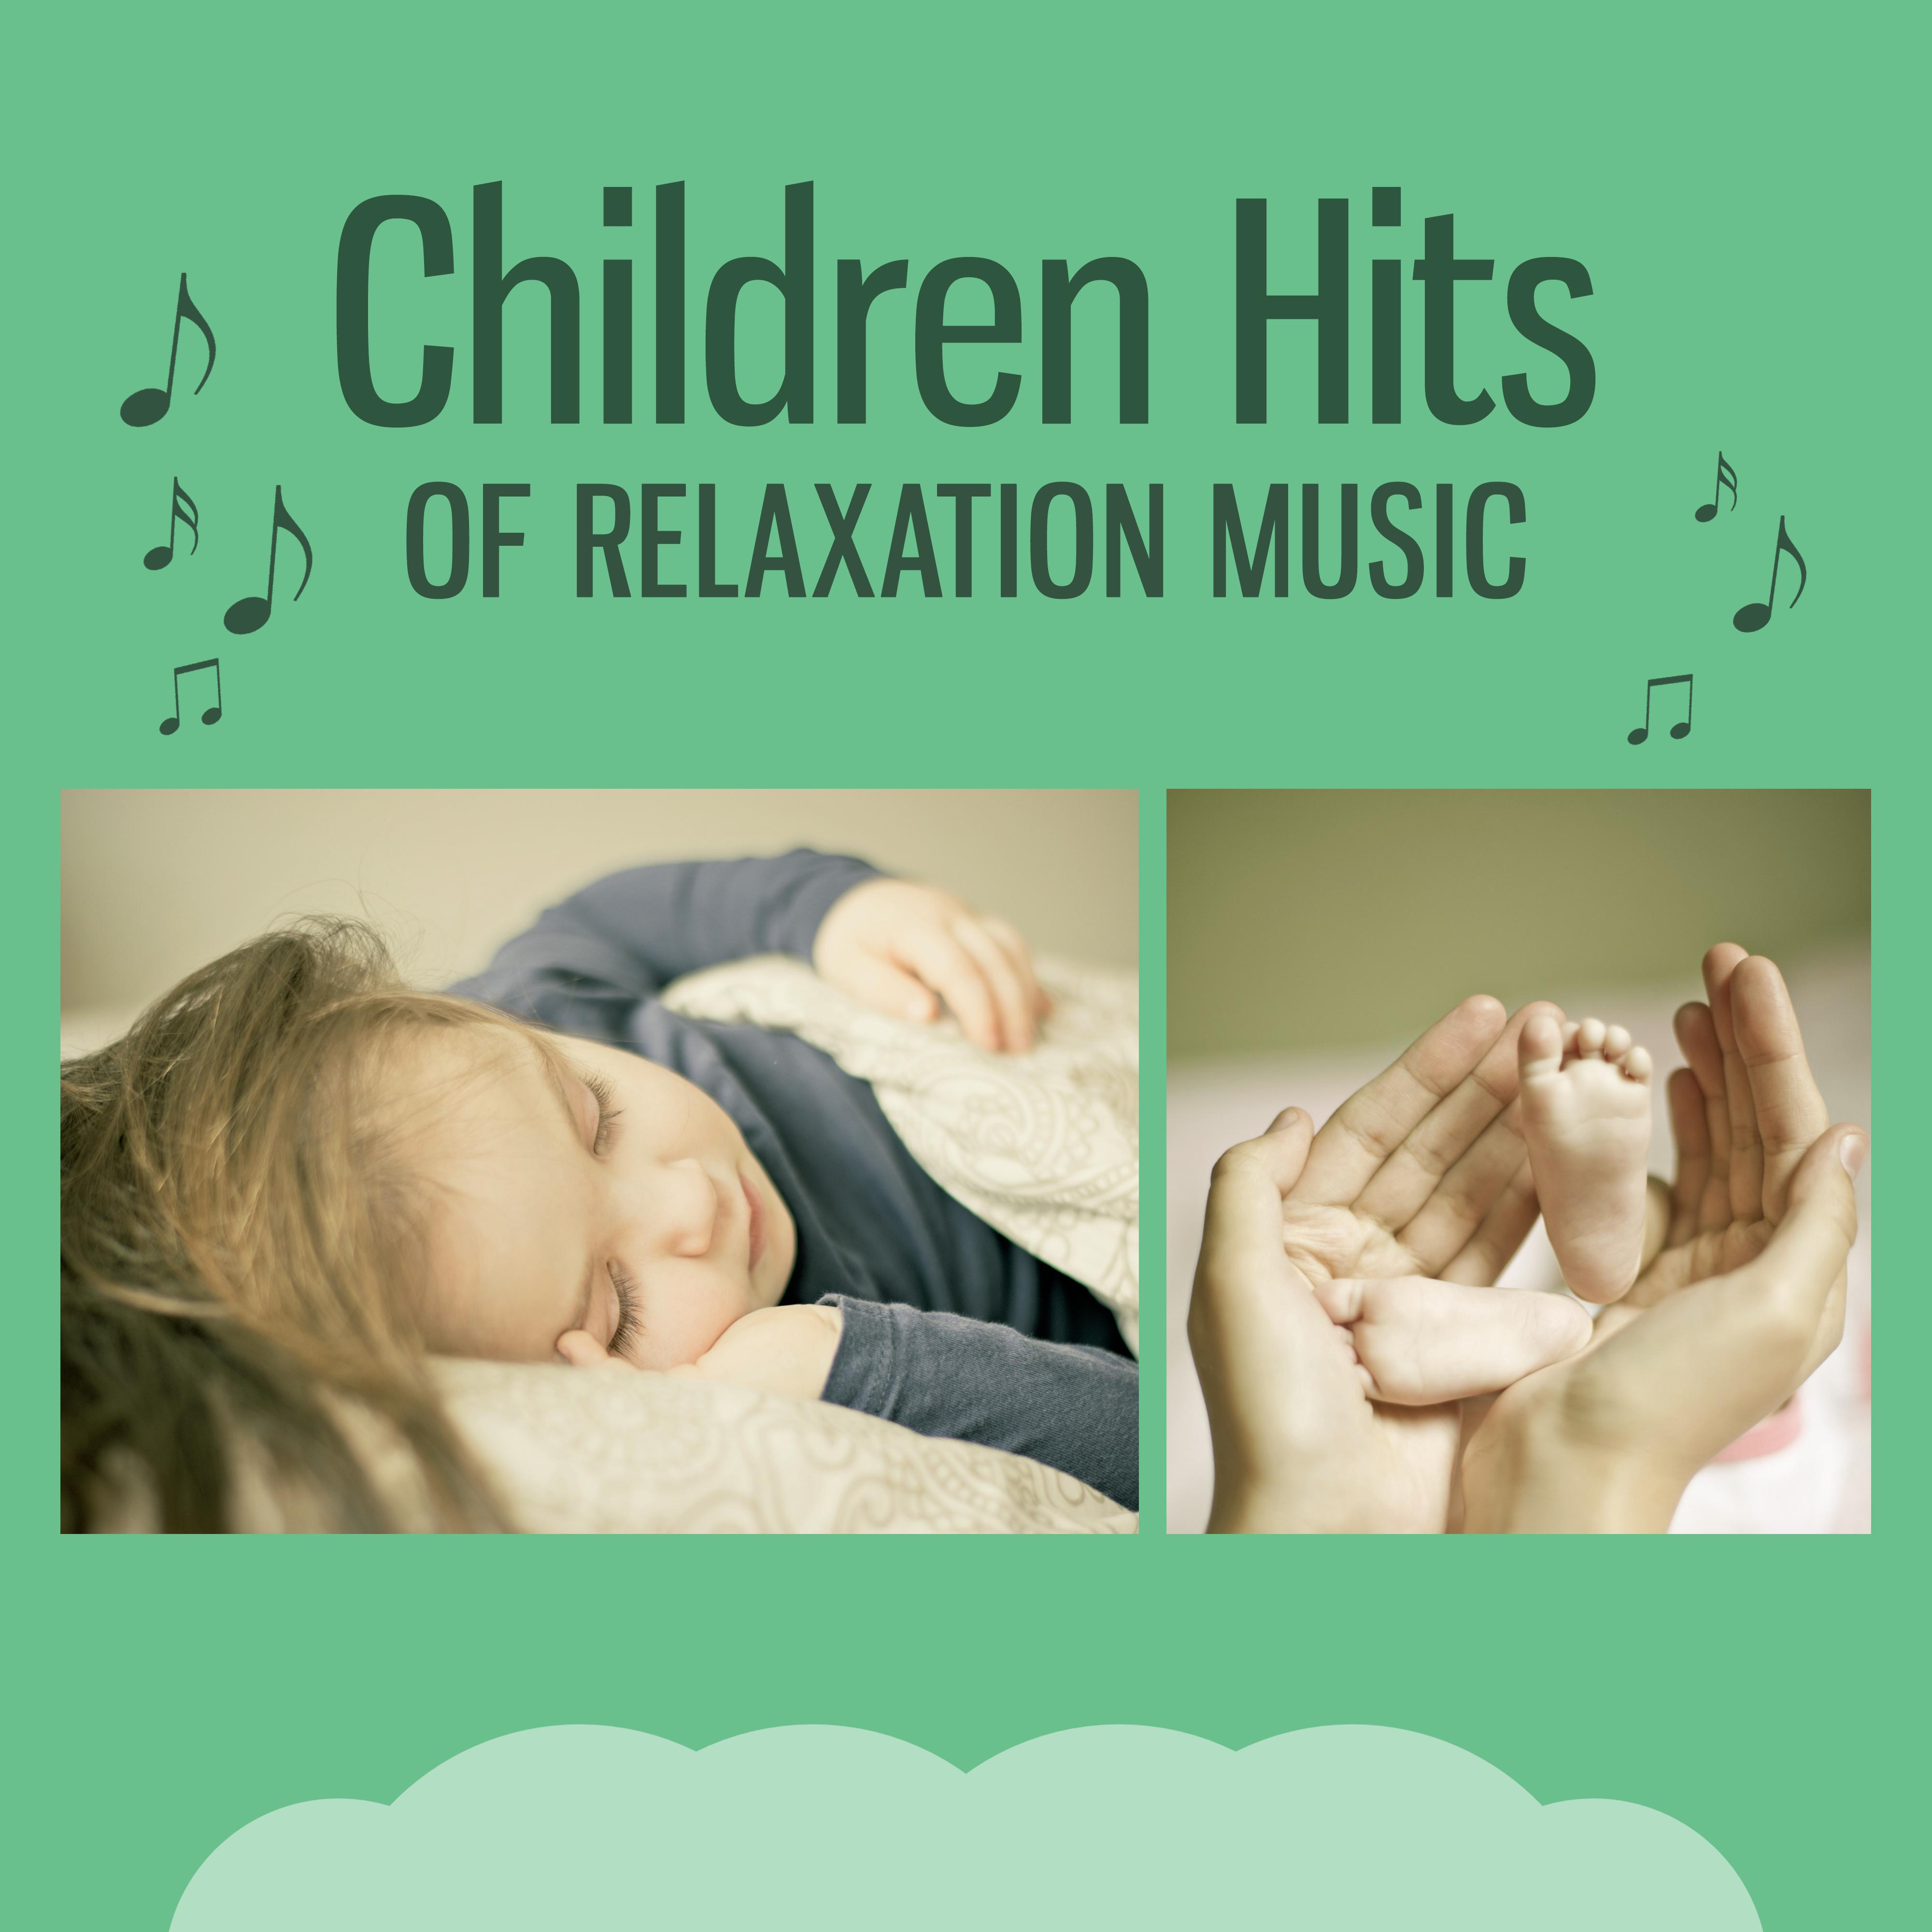 Children Hits of Relaxation Music  Soft Sounds of Birds  Ocean Waves for Children to Easily Fall Asleep, Calm Down and Relax with Relaxing Baby Music to Sleep